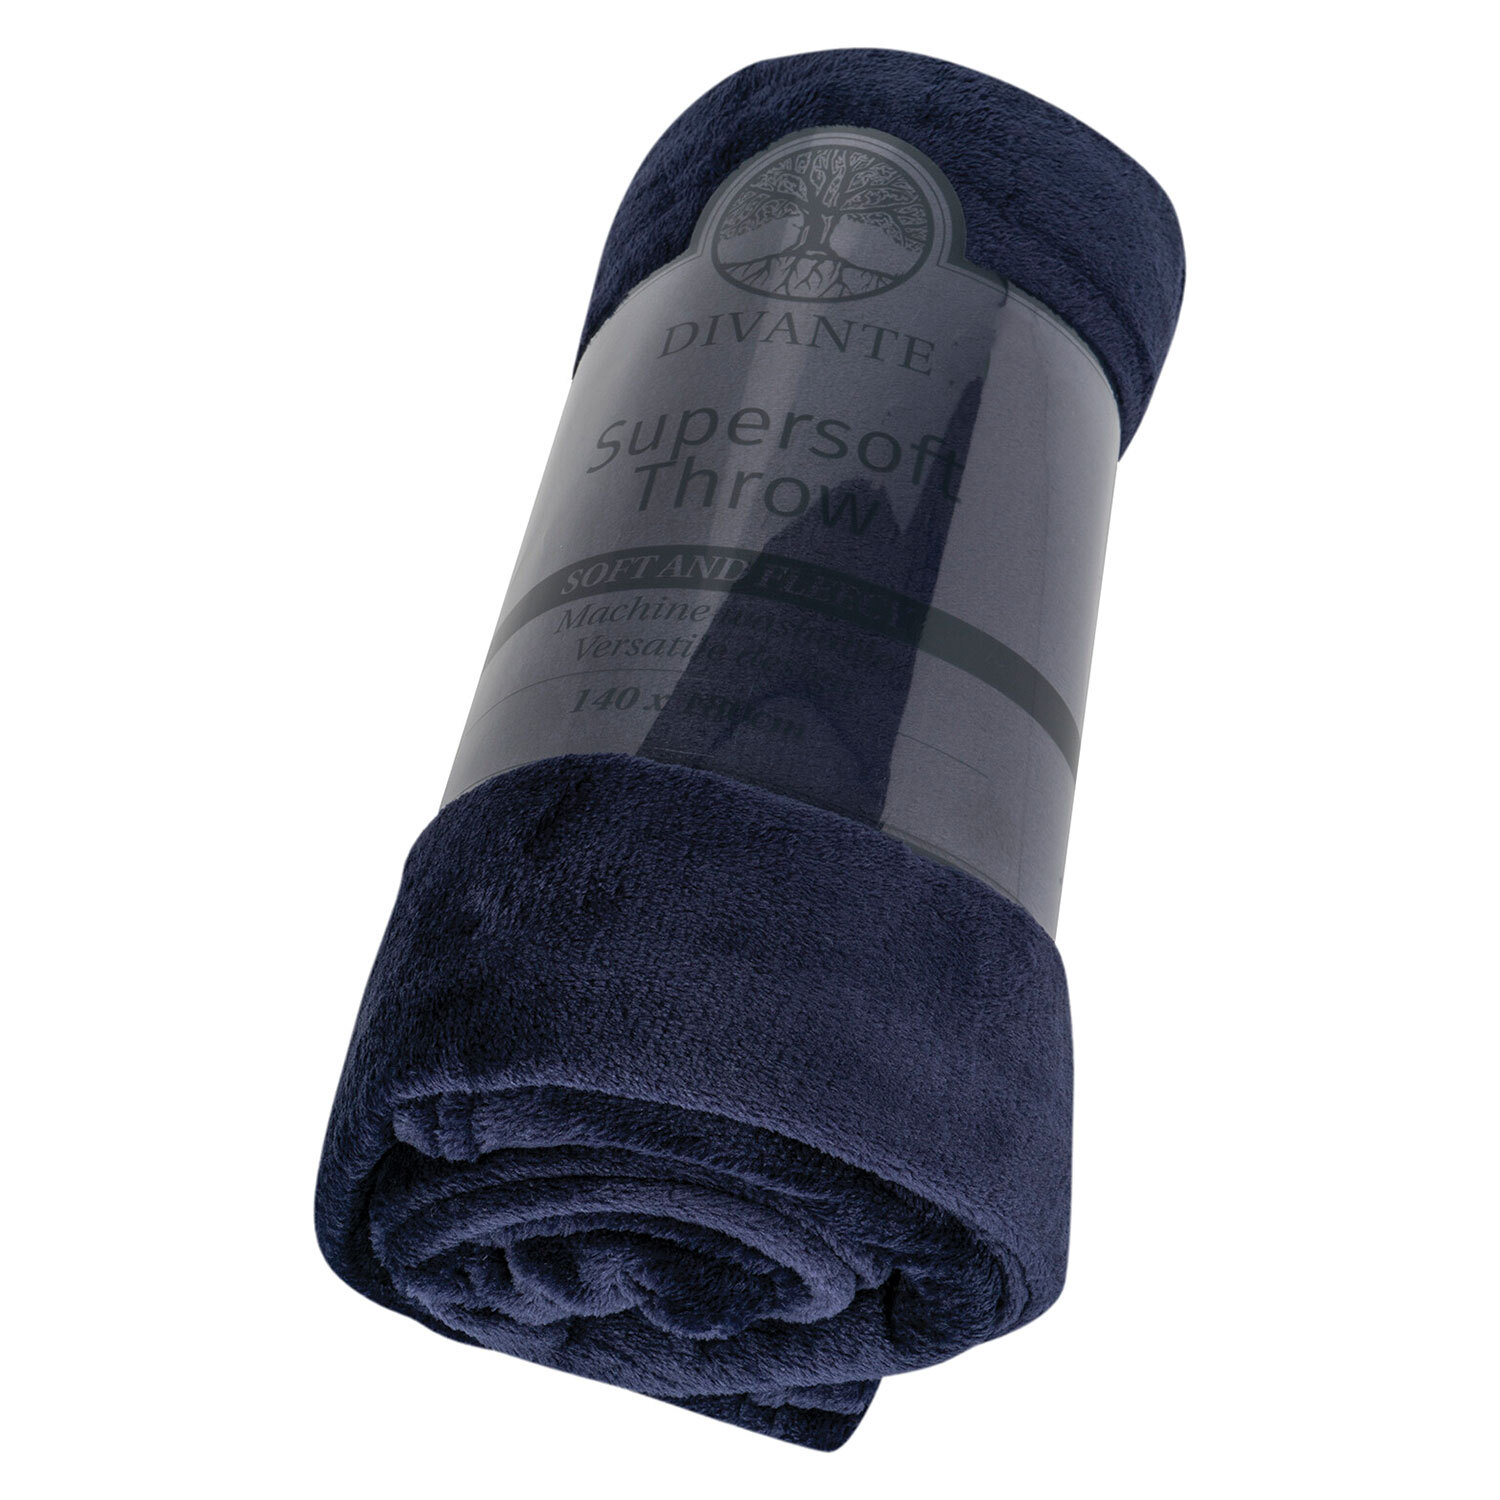 Divante Navy Supersoft Large Throw Image 1